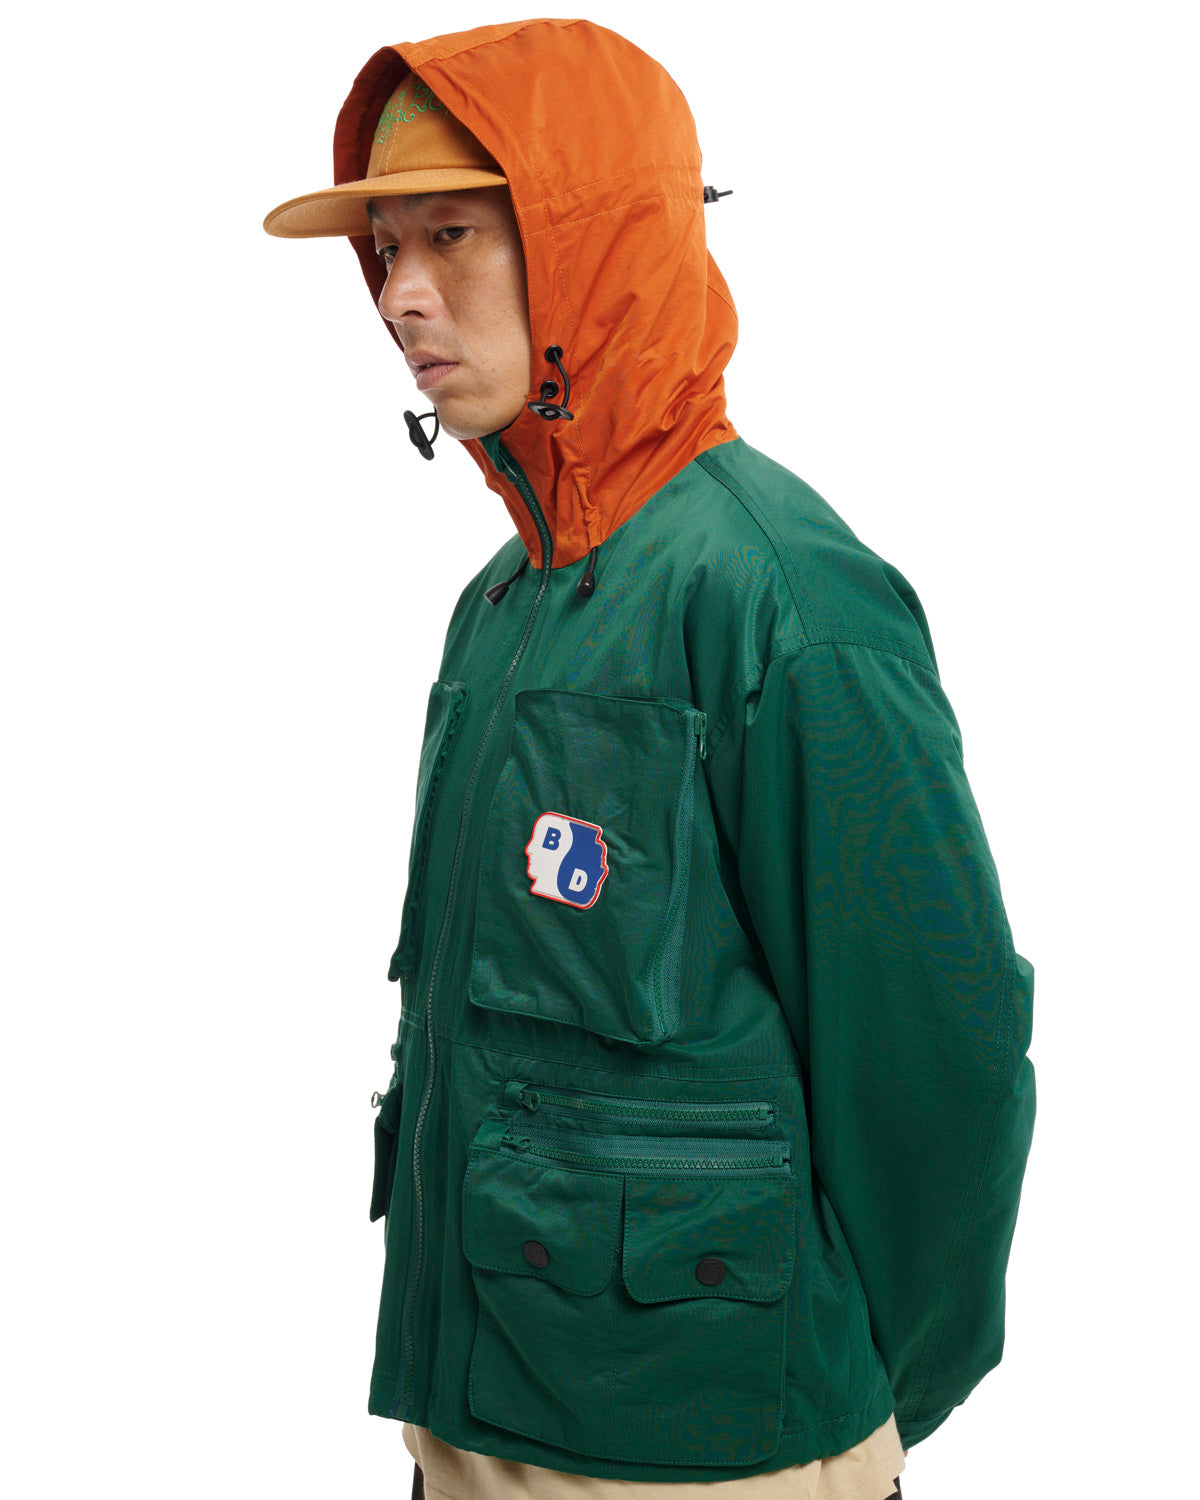 Cropped Hunting Jacket - Green/Terracotta 6